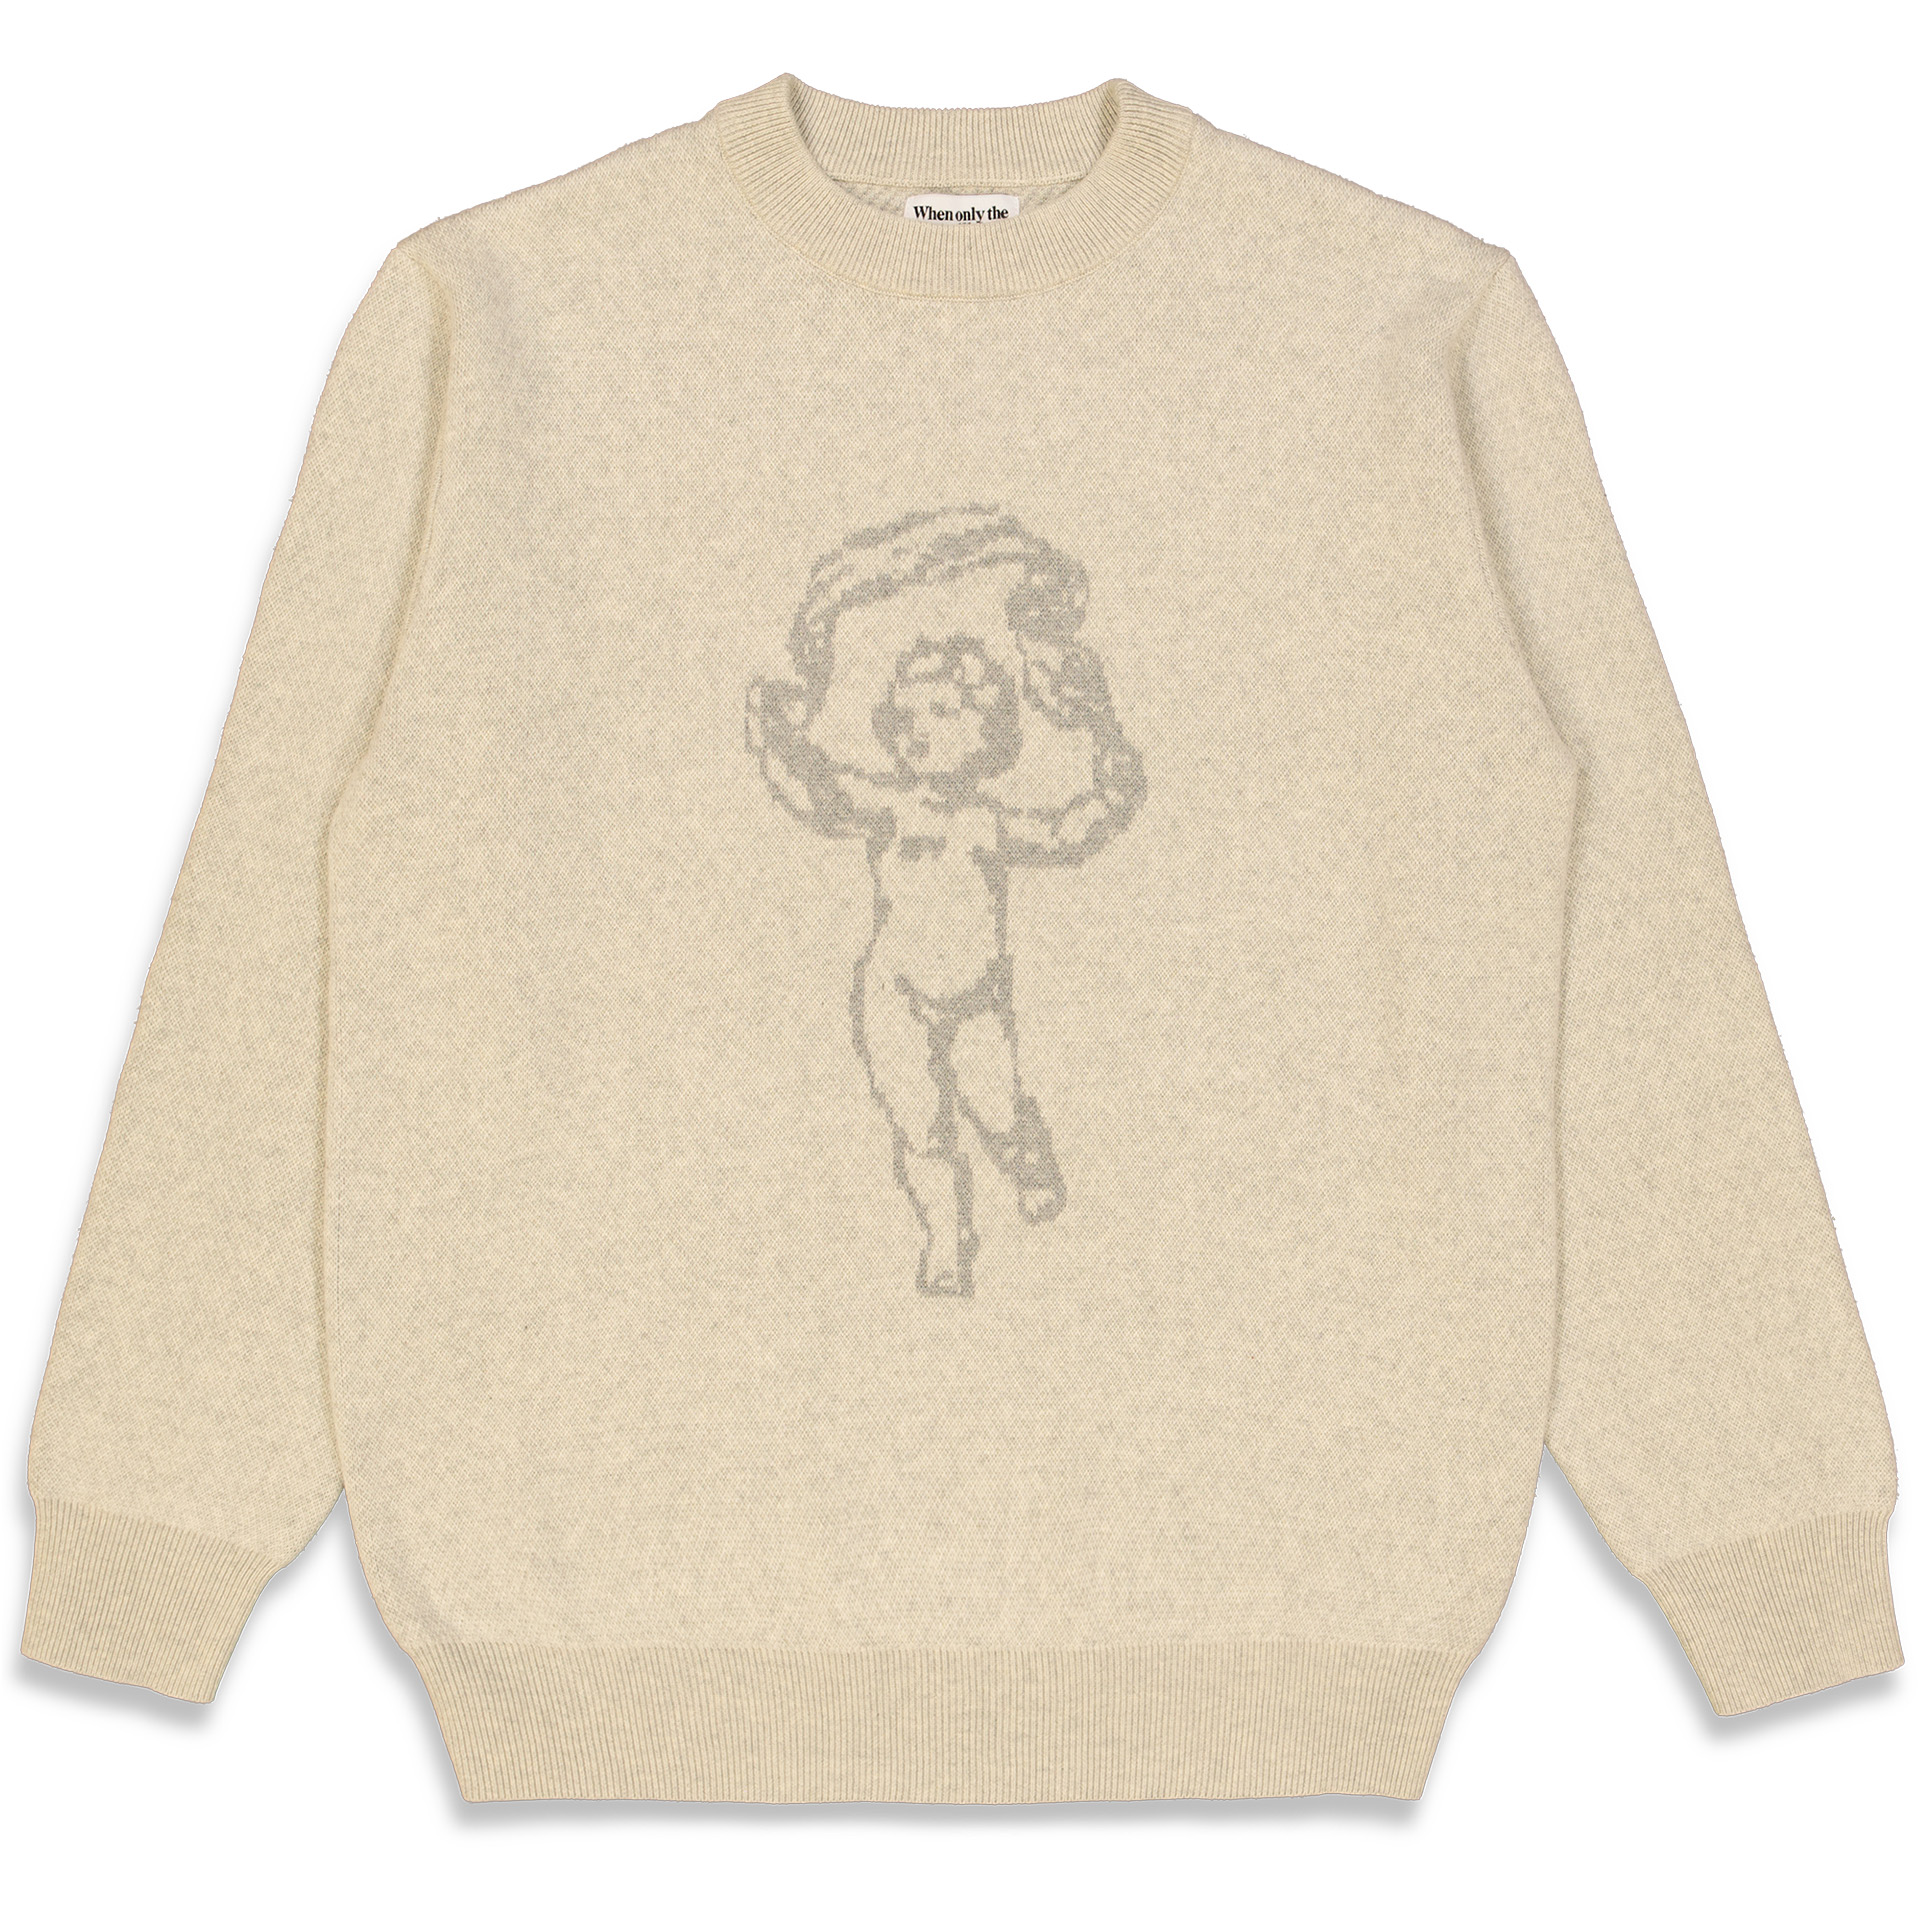 The Loose Company Angel Knit Sweater